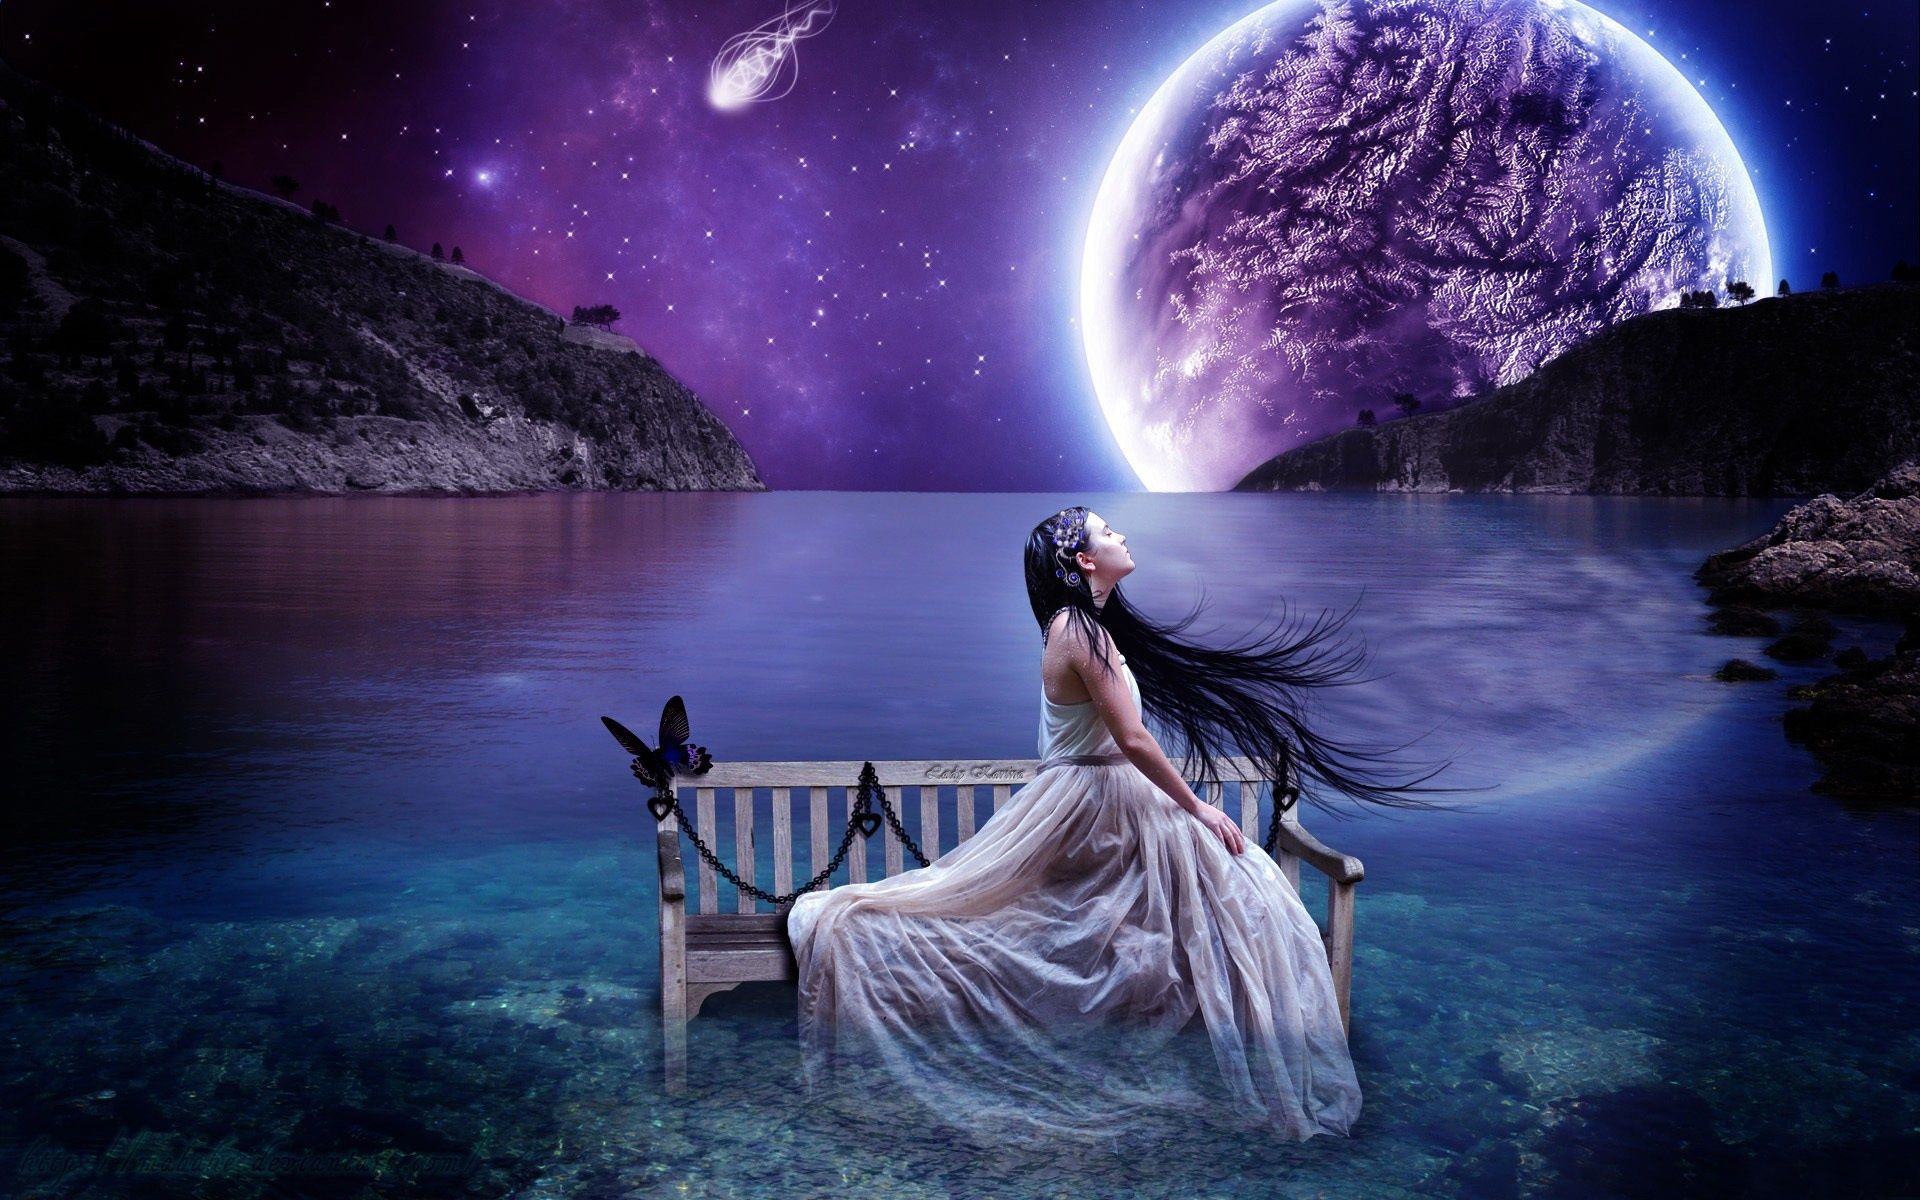 Aesthetic creative landscape, lake water benches girl, sky planet